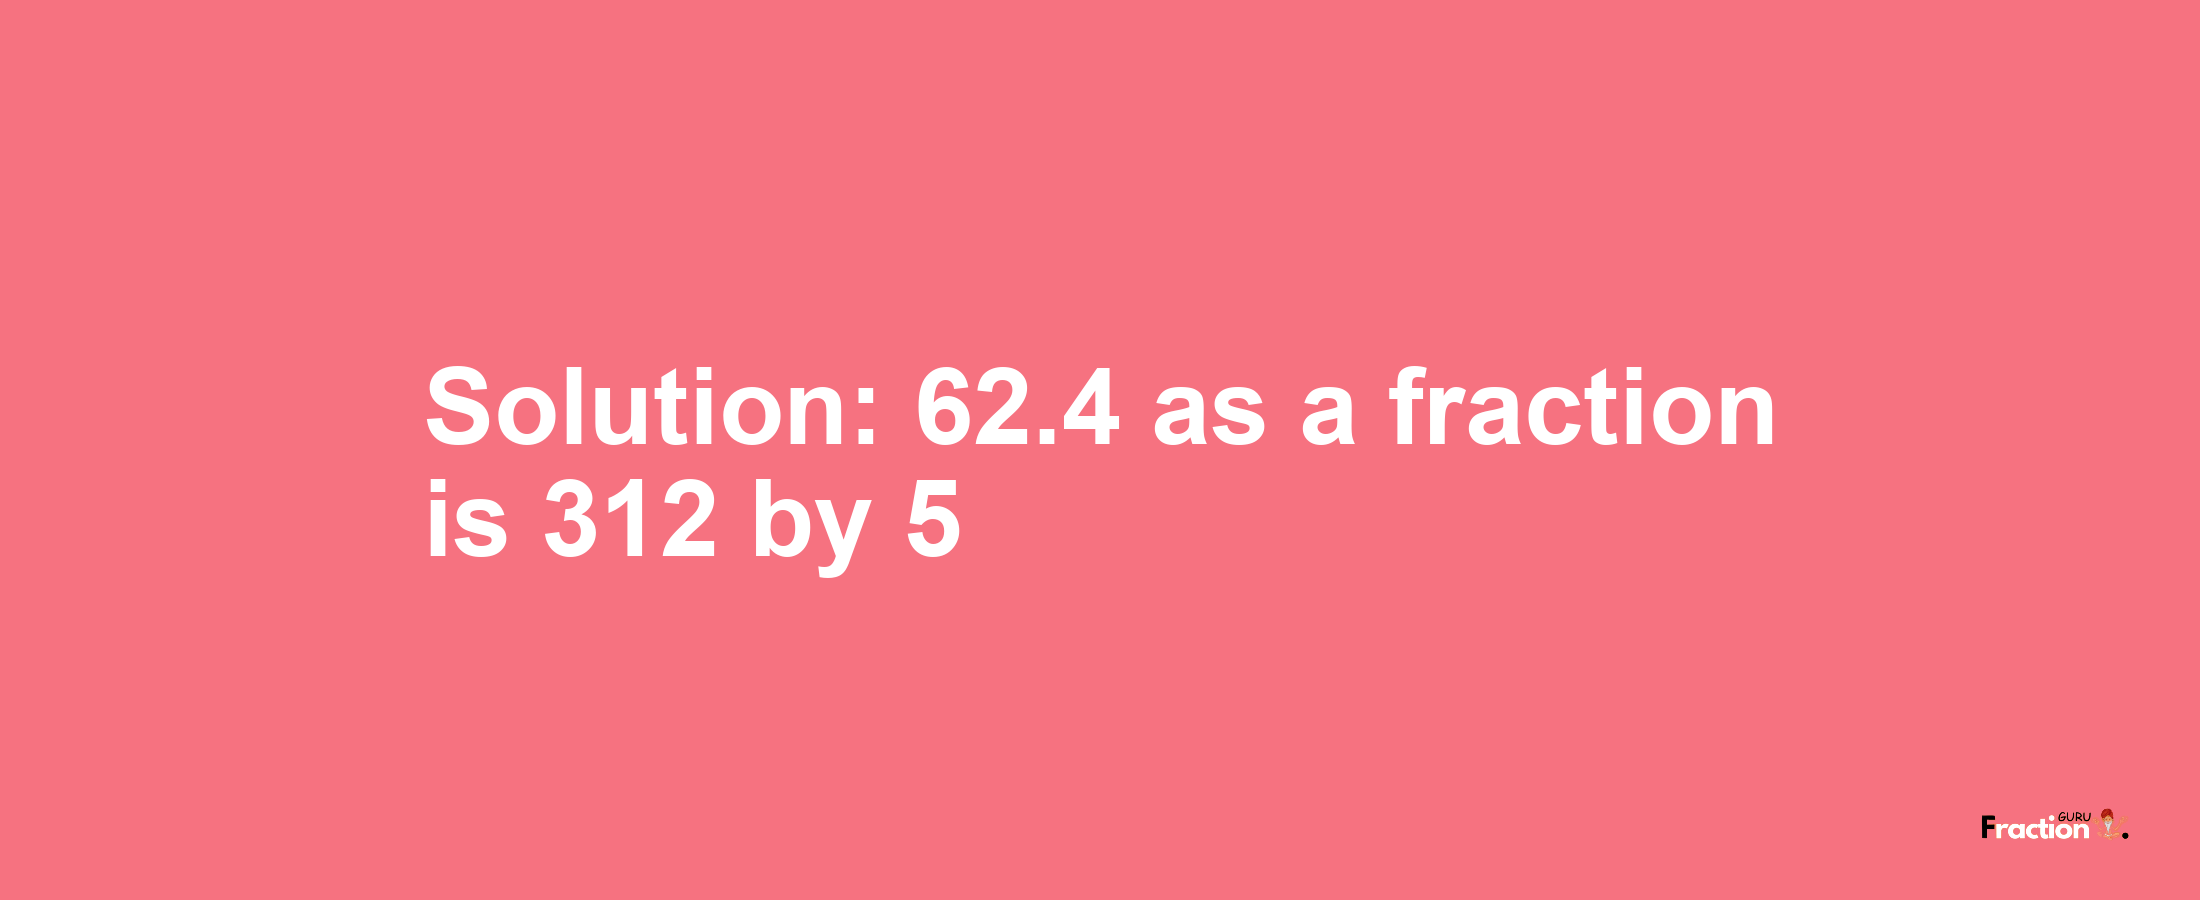 Solution:62.4 as a fraction is 312/5